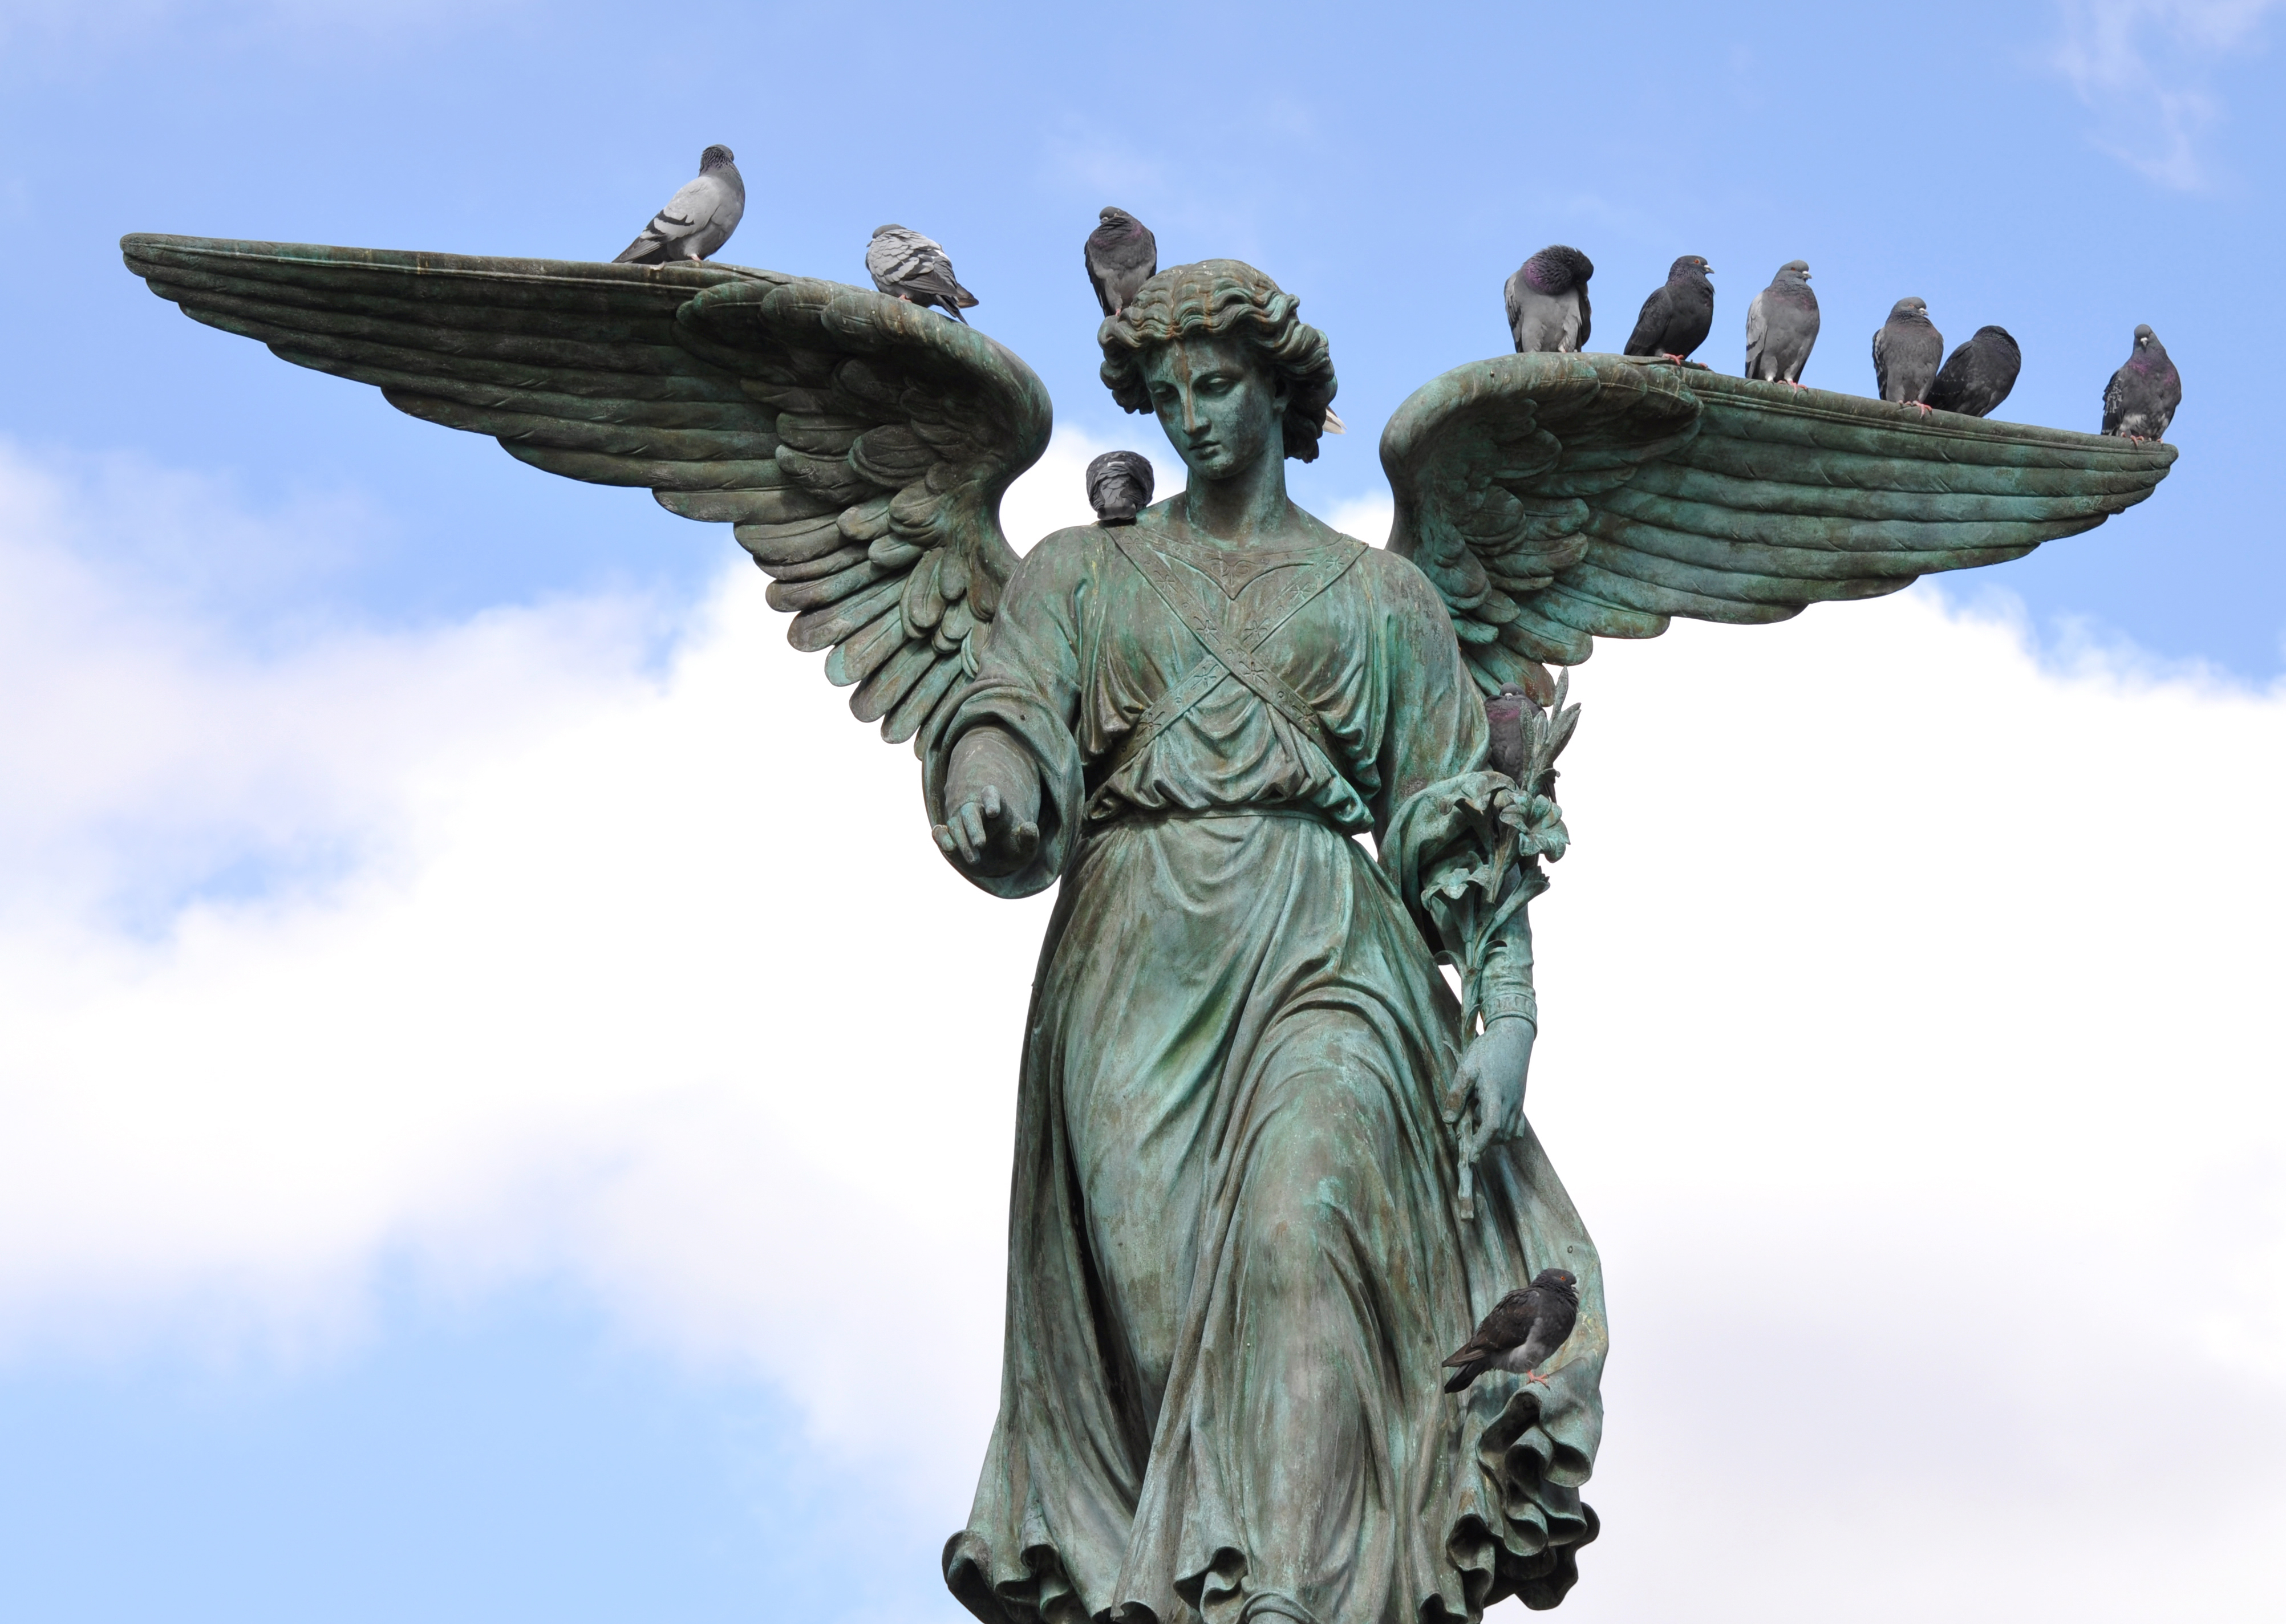 Bethesda Fountain - Angel of the Waters - Central Park